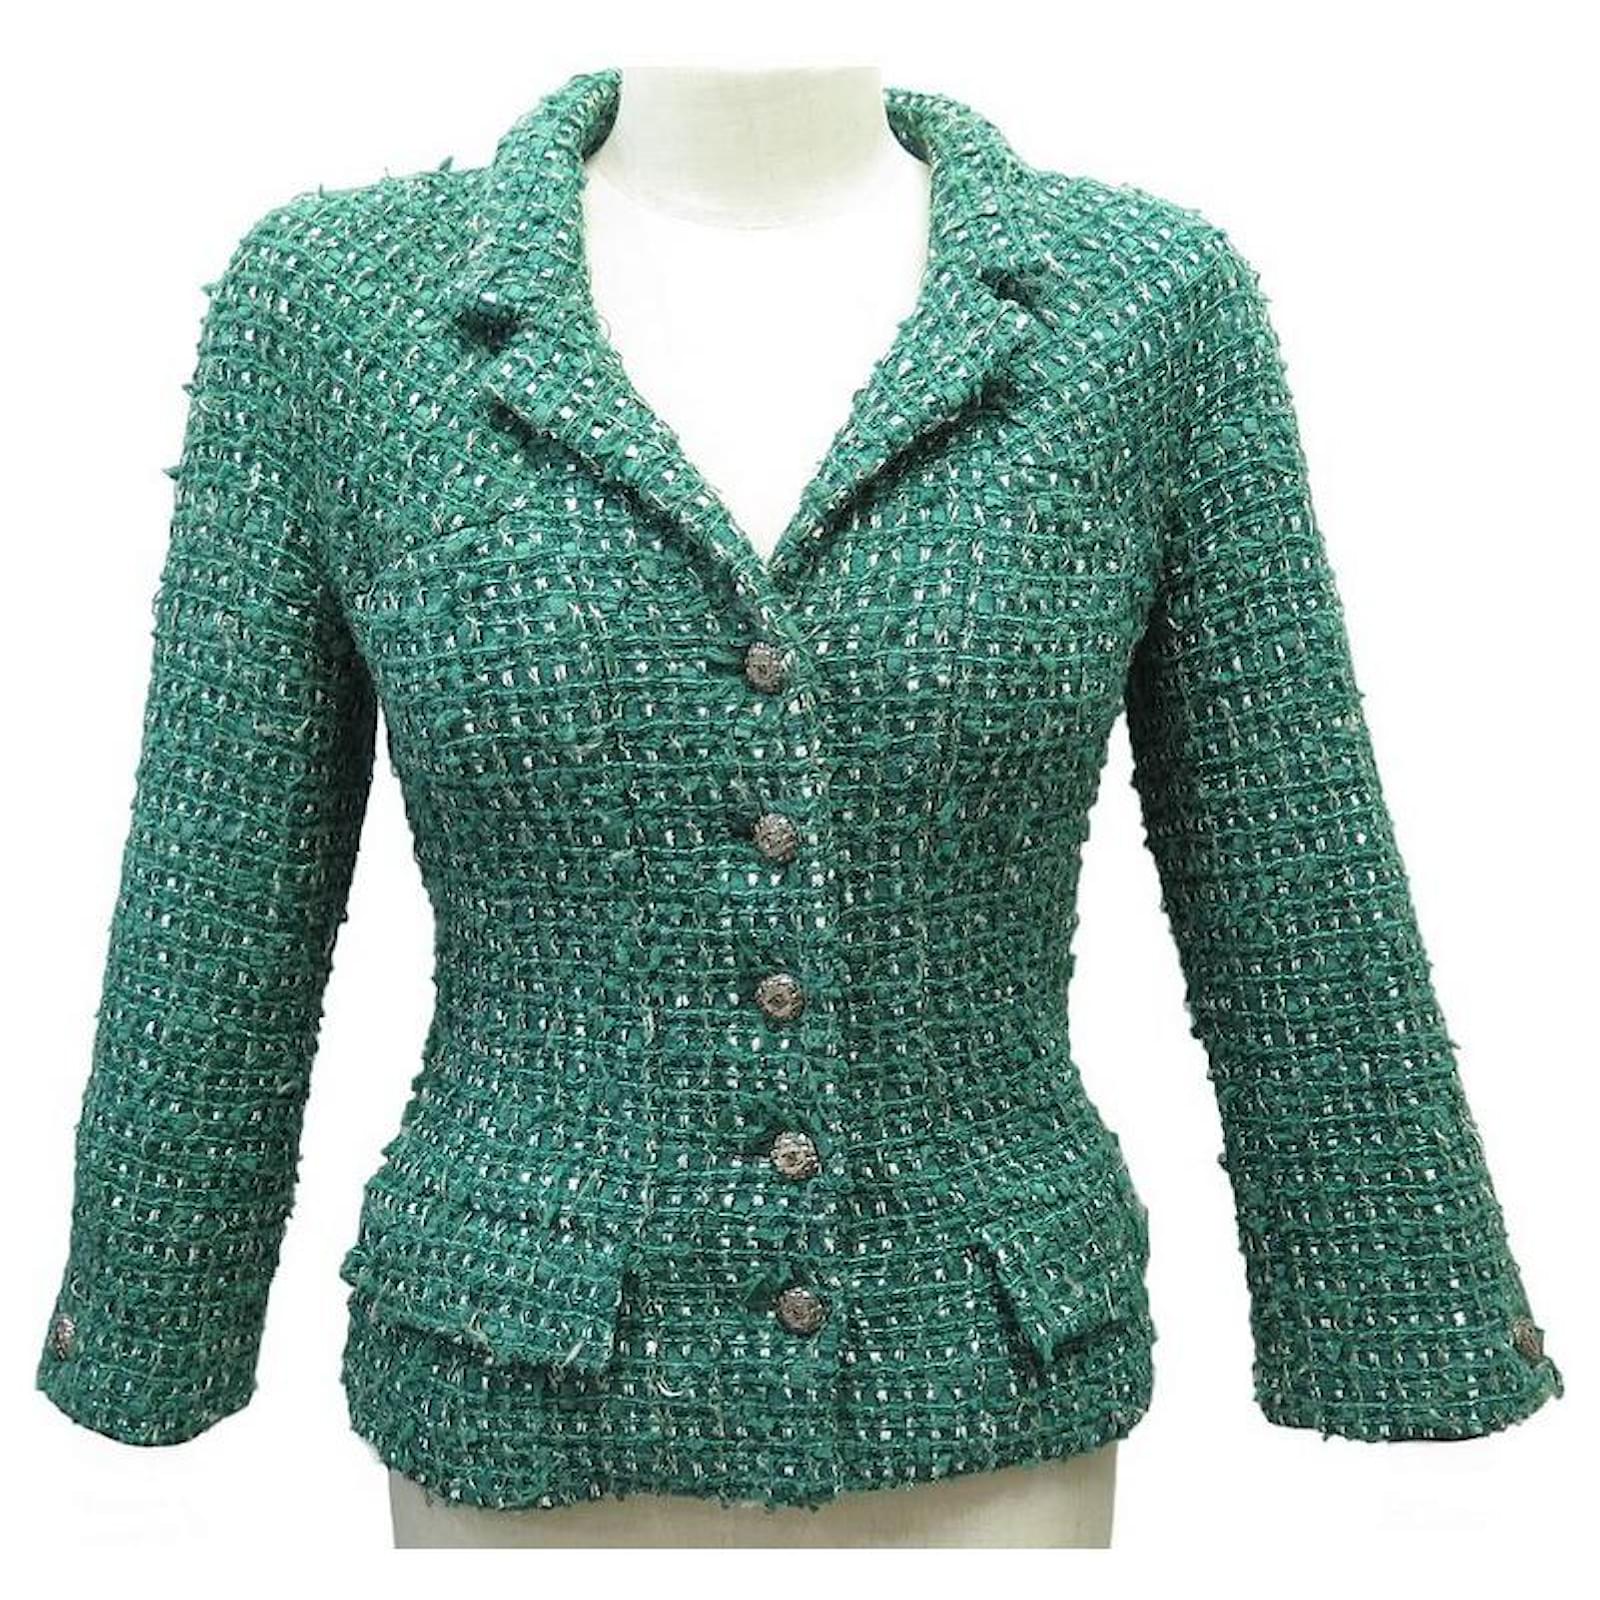 CHANEL P JACKET27772V16008 M 38 CRUISE BUTTONS LOGO CC TWEED